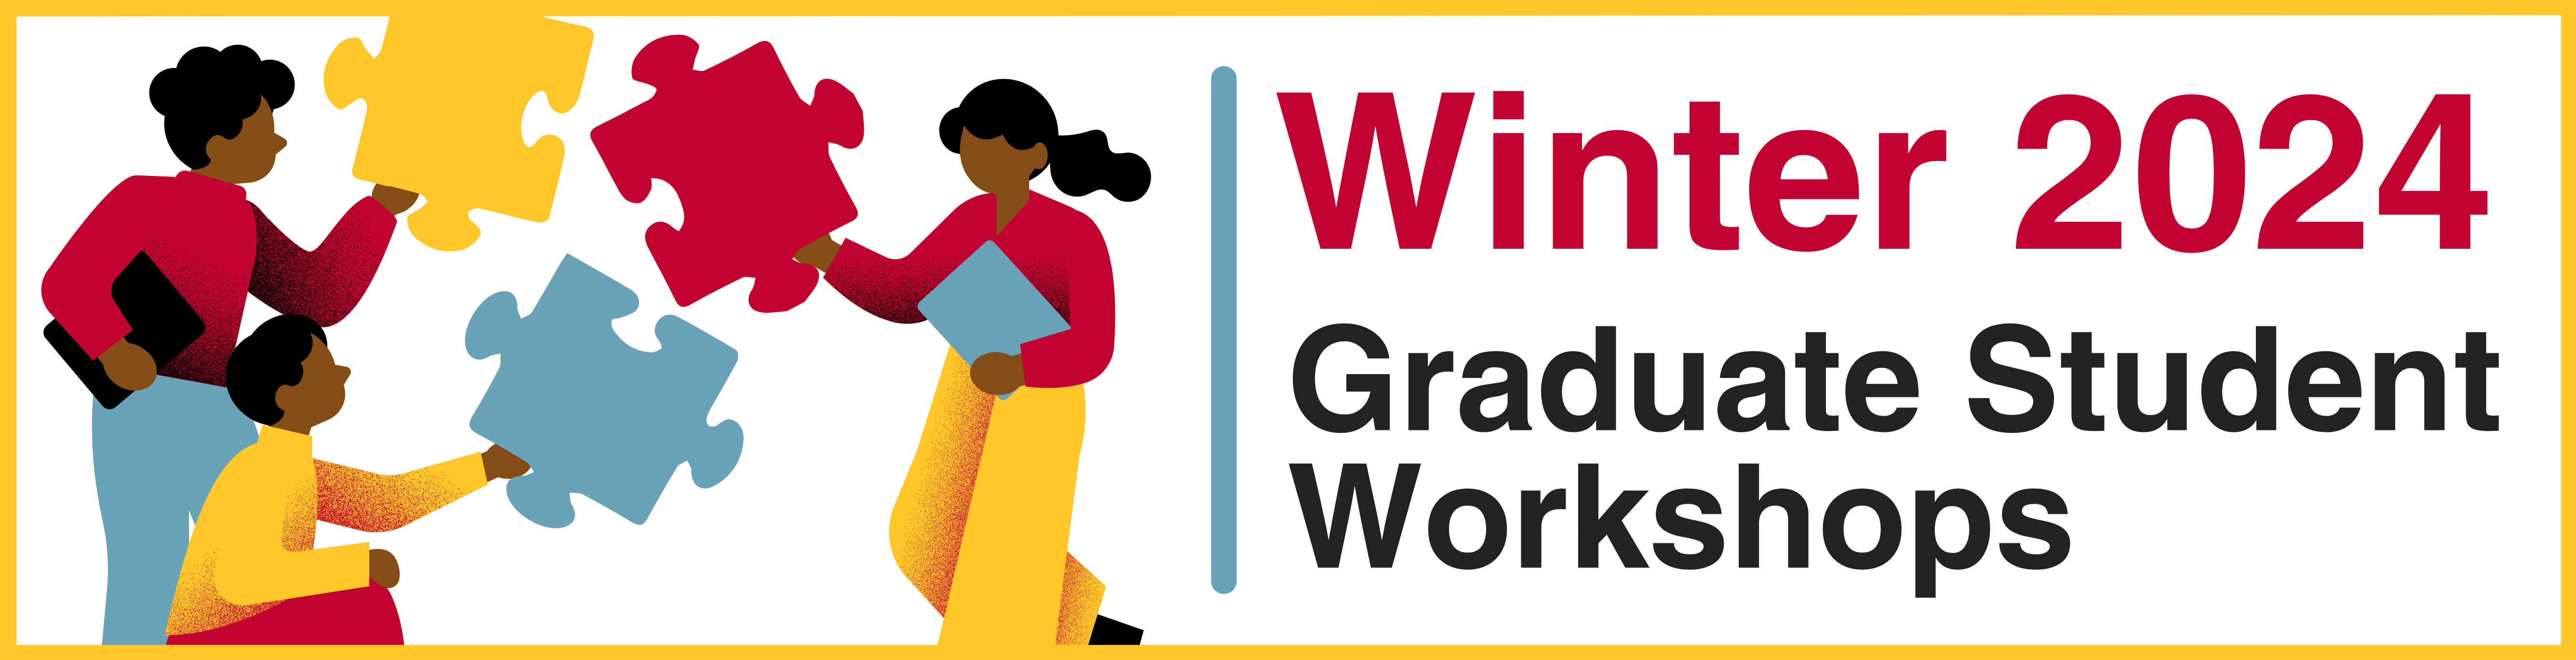 Winter 2024 Graduate Student Workshops and Opportunities